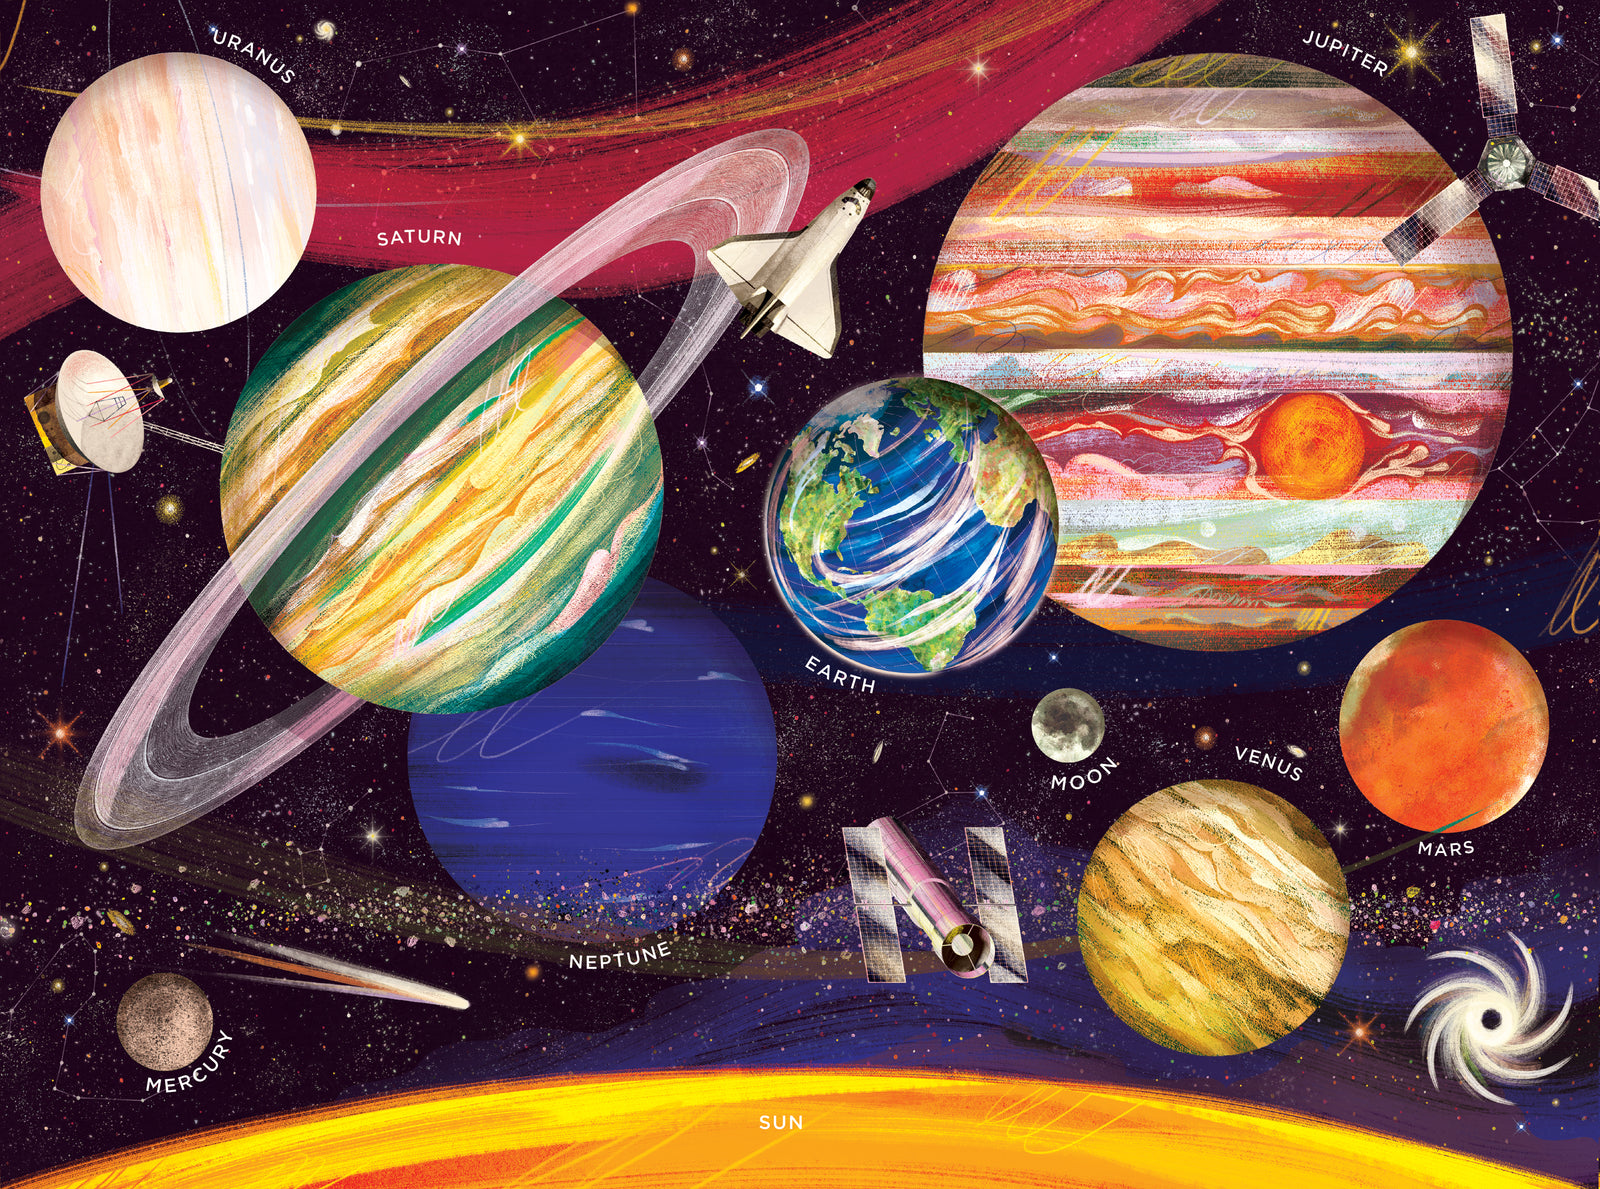 500-Piece Boxed Puzzle - Solar System